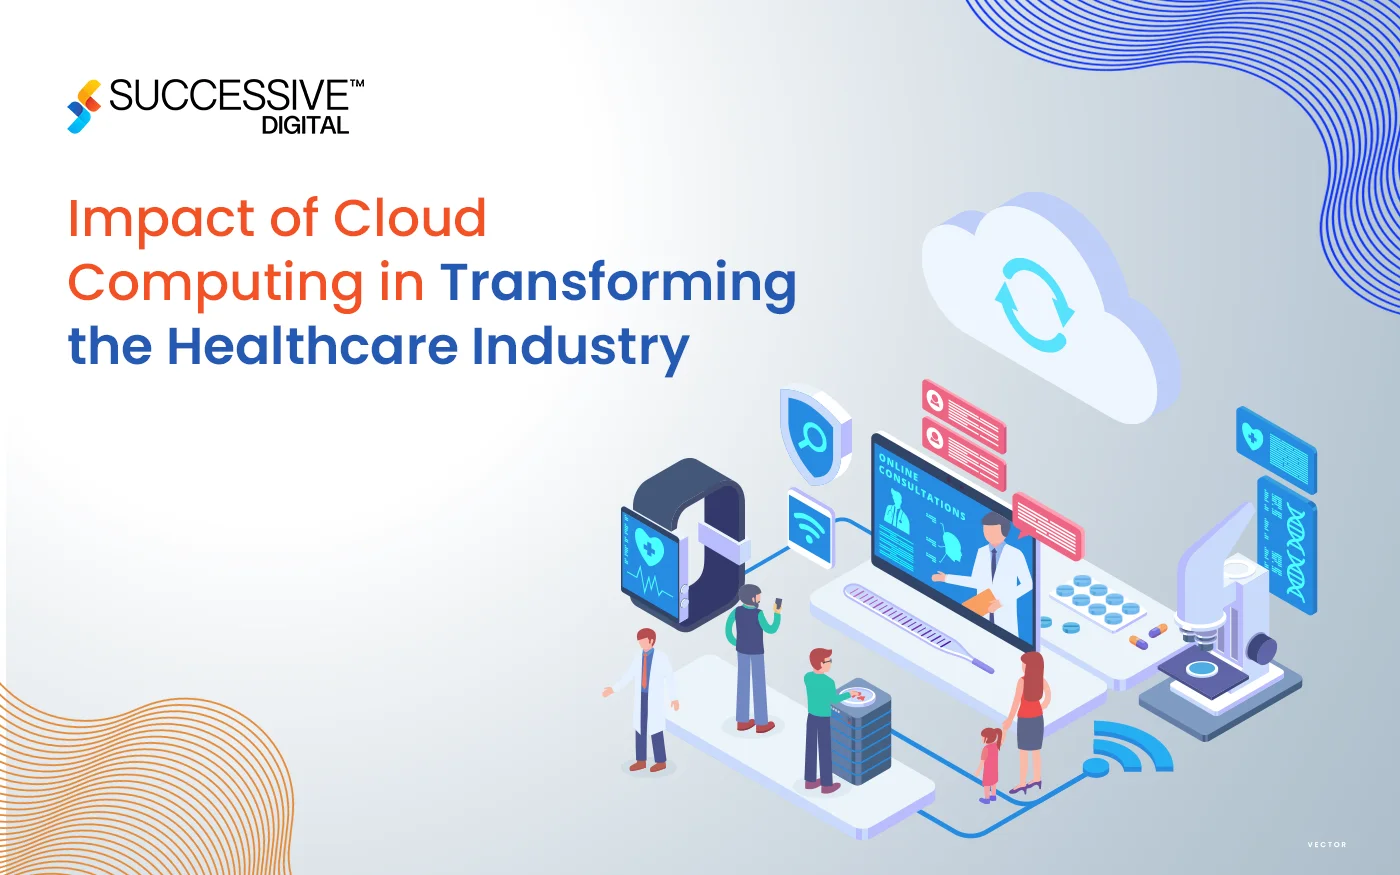 Impact of Cloud Computing in Transforming the Healthcare Industry